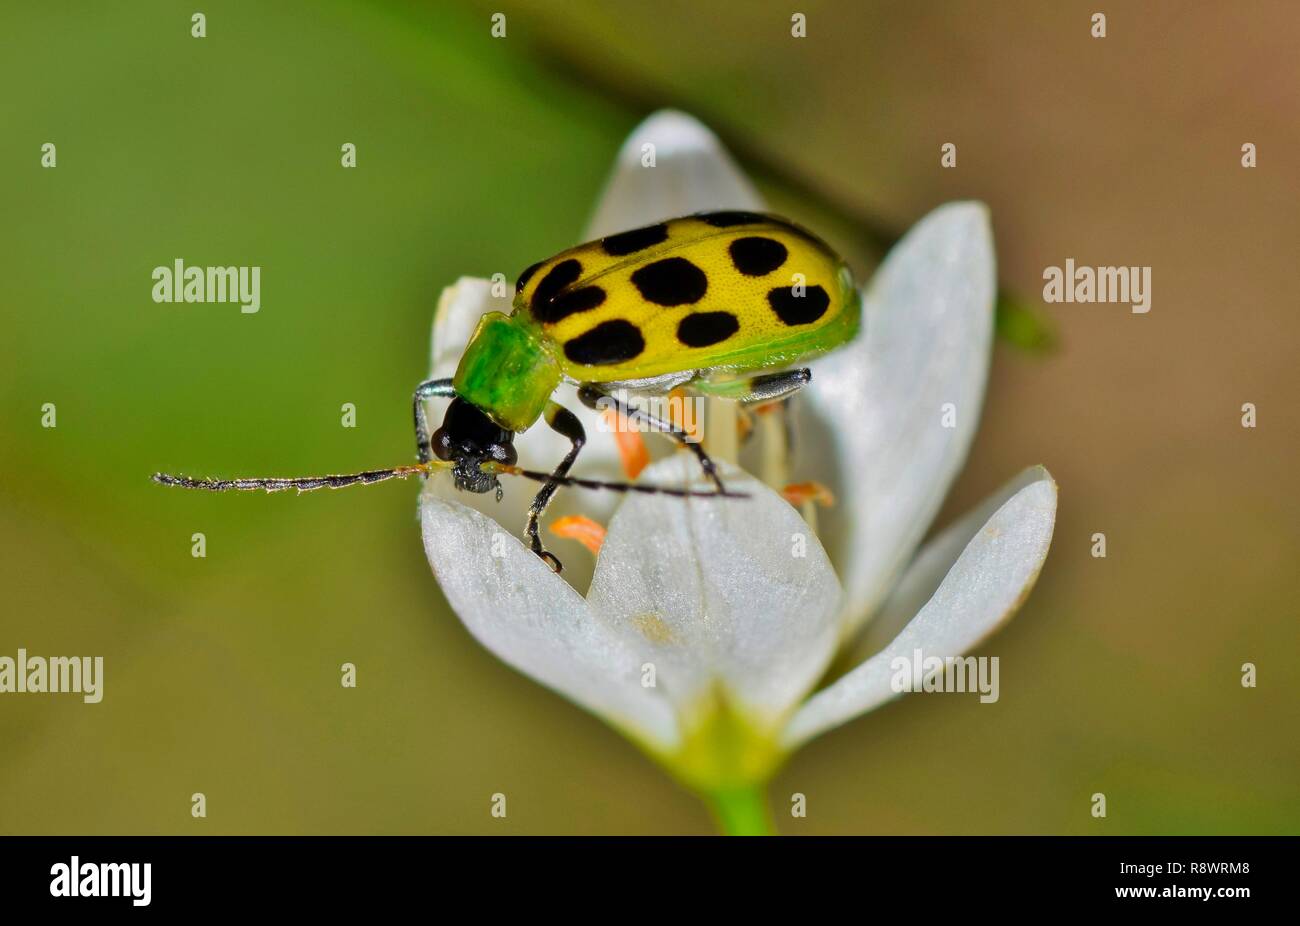 A Spotted Cucumber beetle (Diabrotica undecimpunctata) on top of a False Garlic wildflower during springtime. Stock Photo